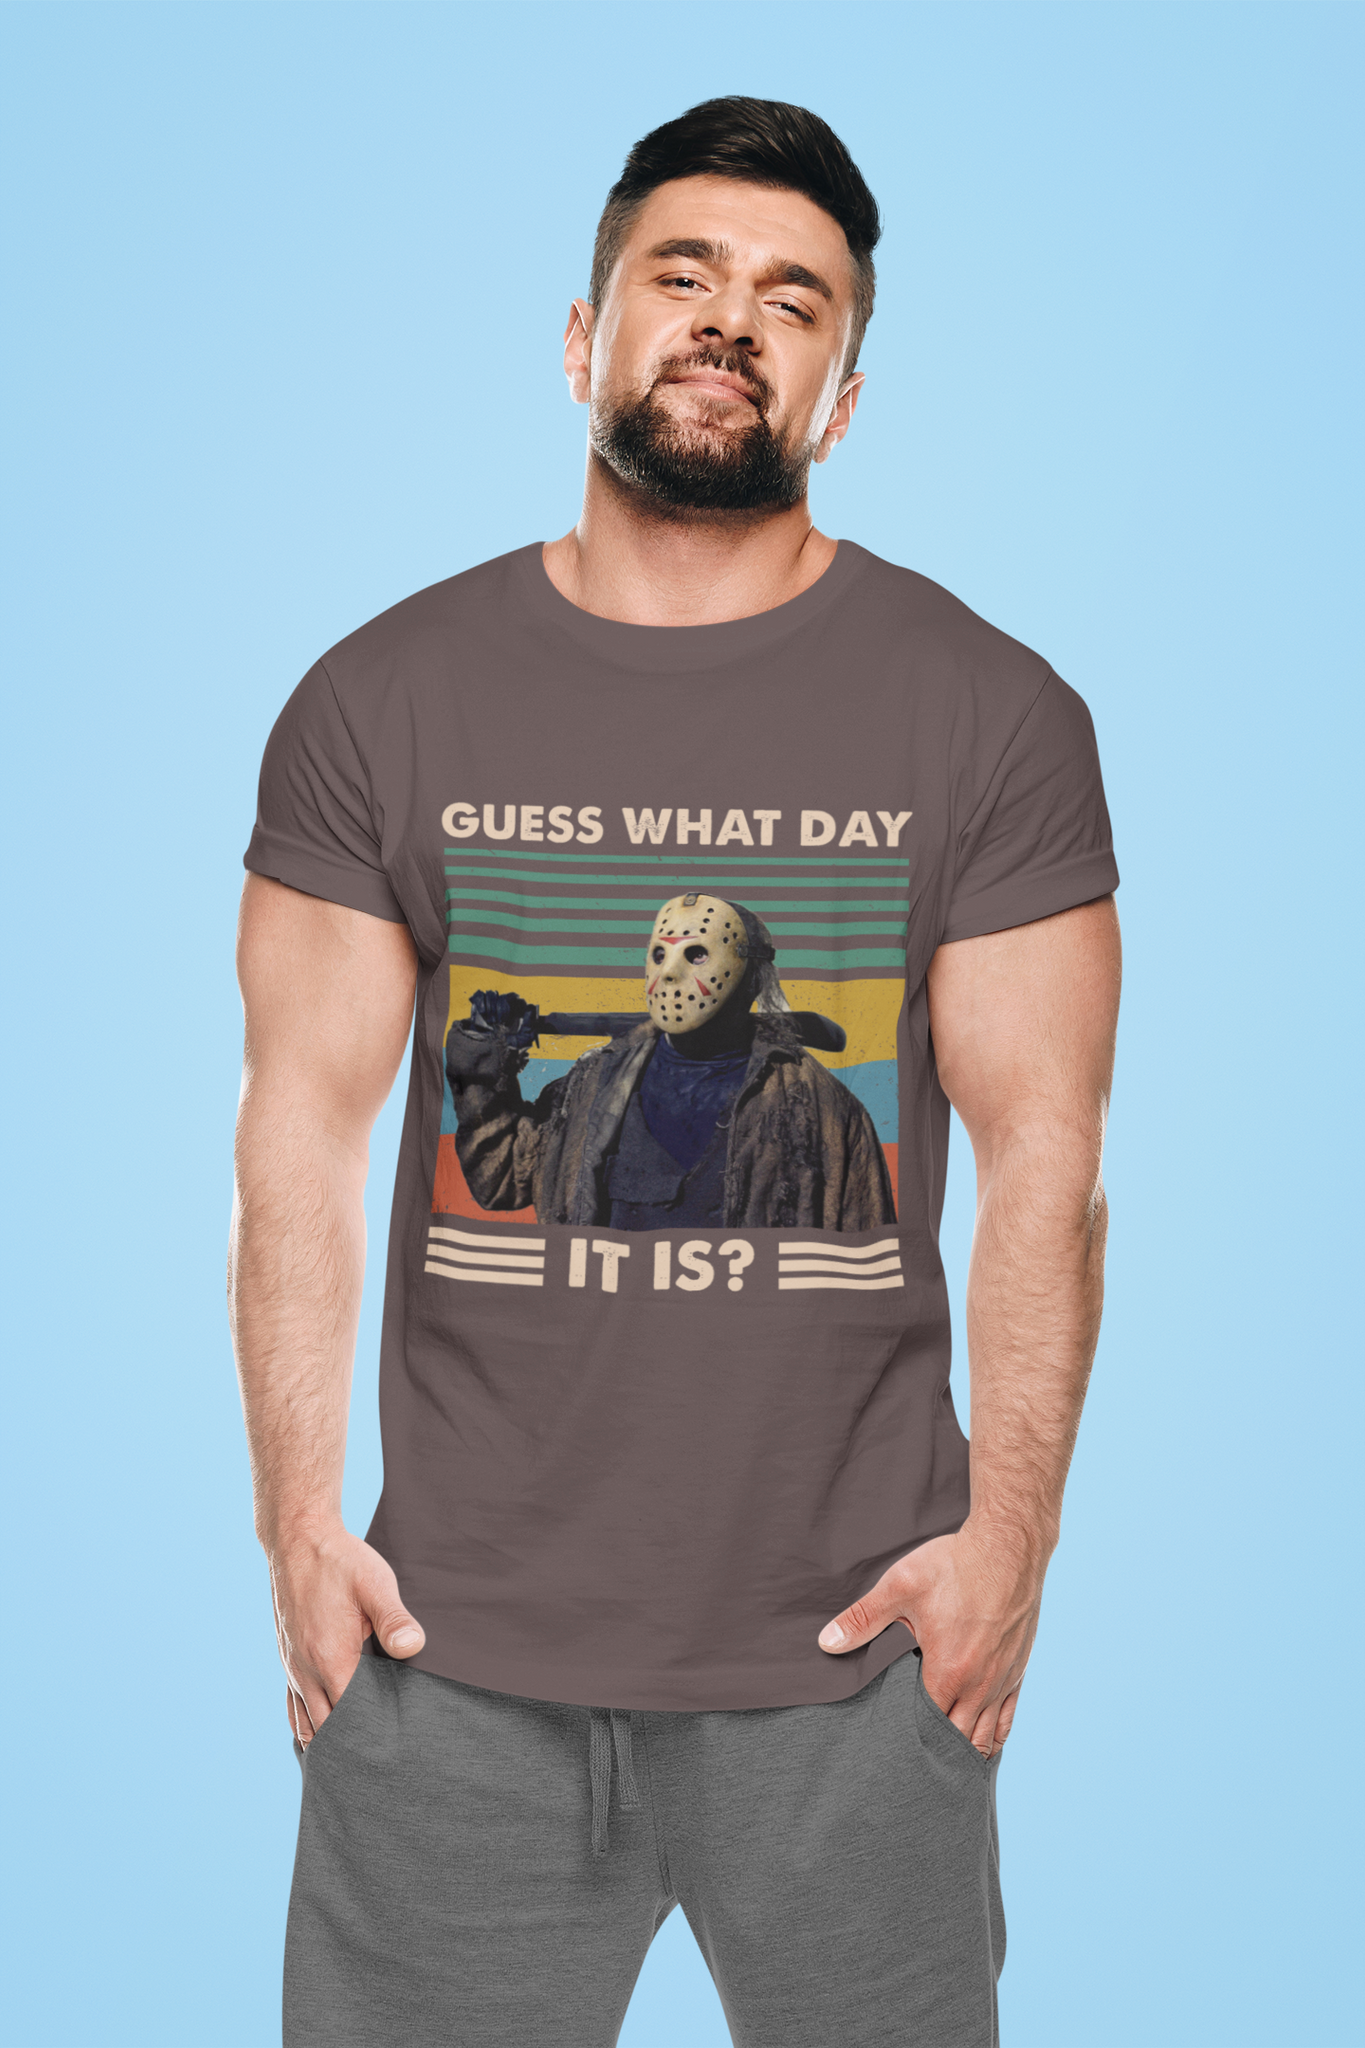 Friday 13th Vintage T Shirt, Guess What Day Is It Tshirt, Jason Voorhees T Shirt, Halloween Gifts